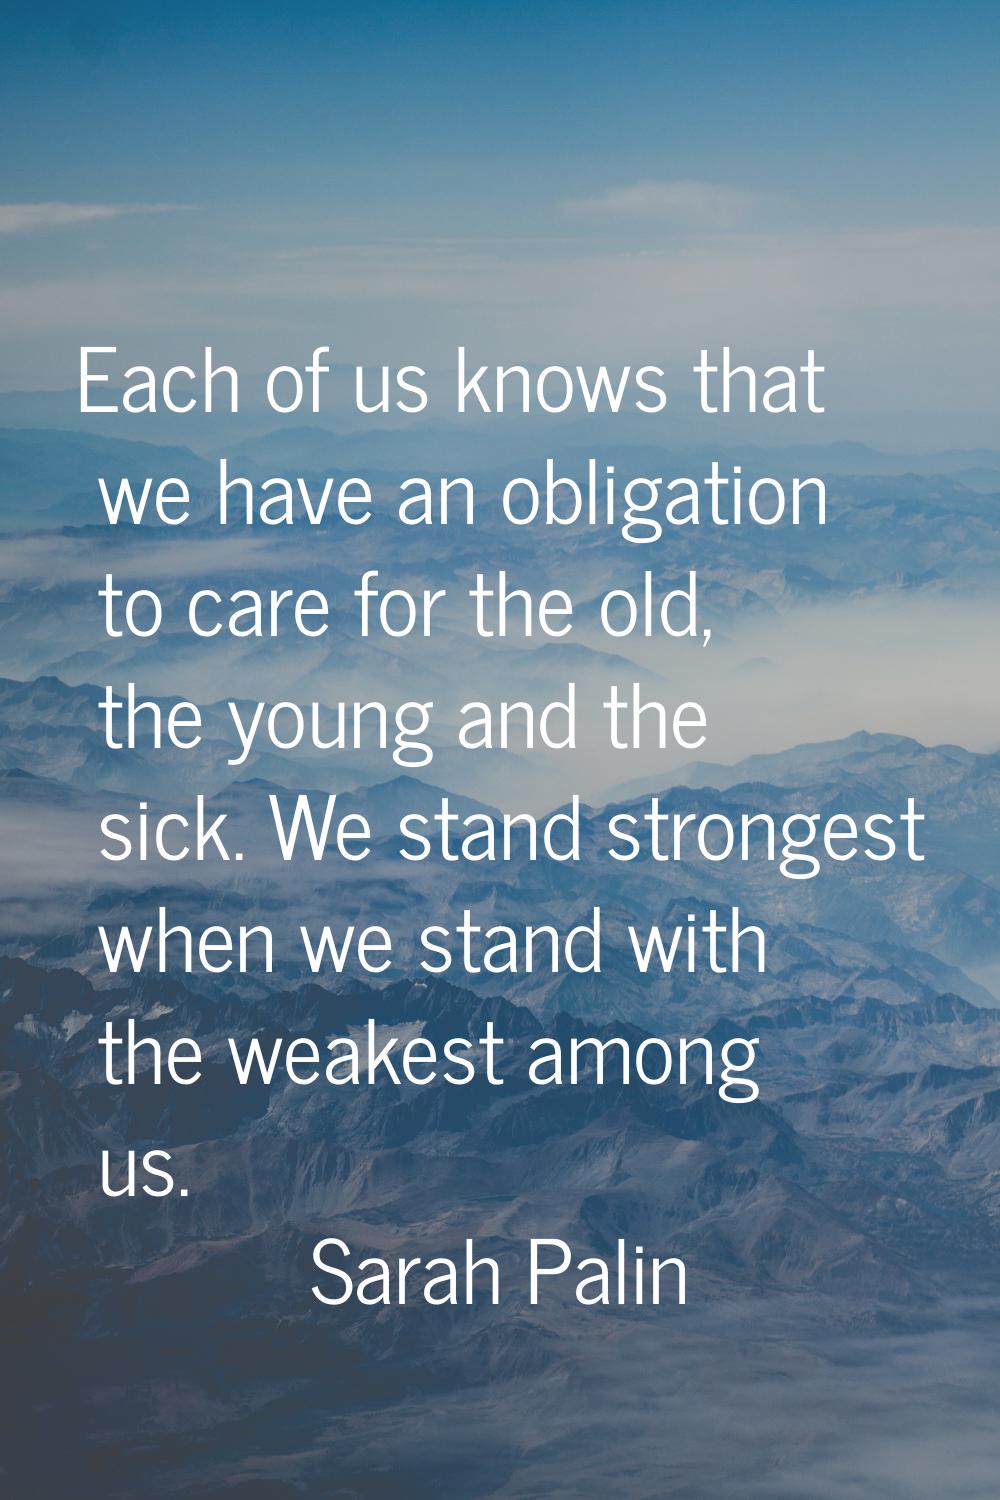 Each of us knows that we have an obligation to care for the old, the young and the sick. We stand s